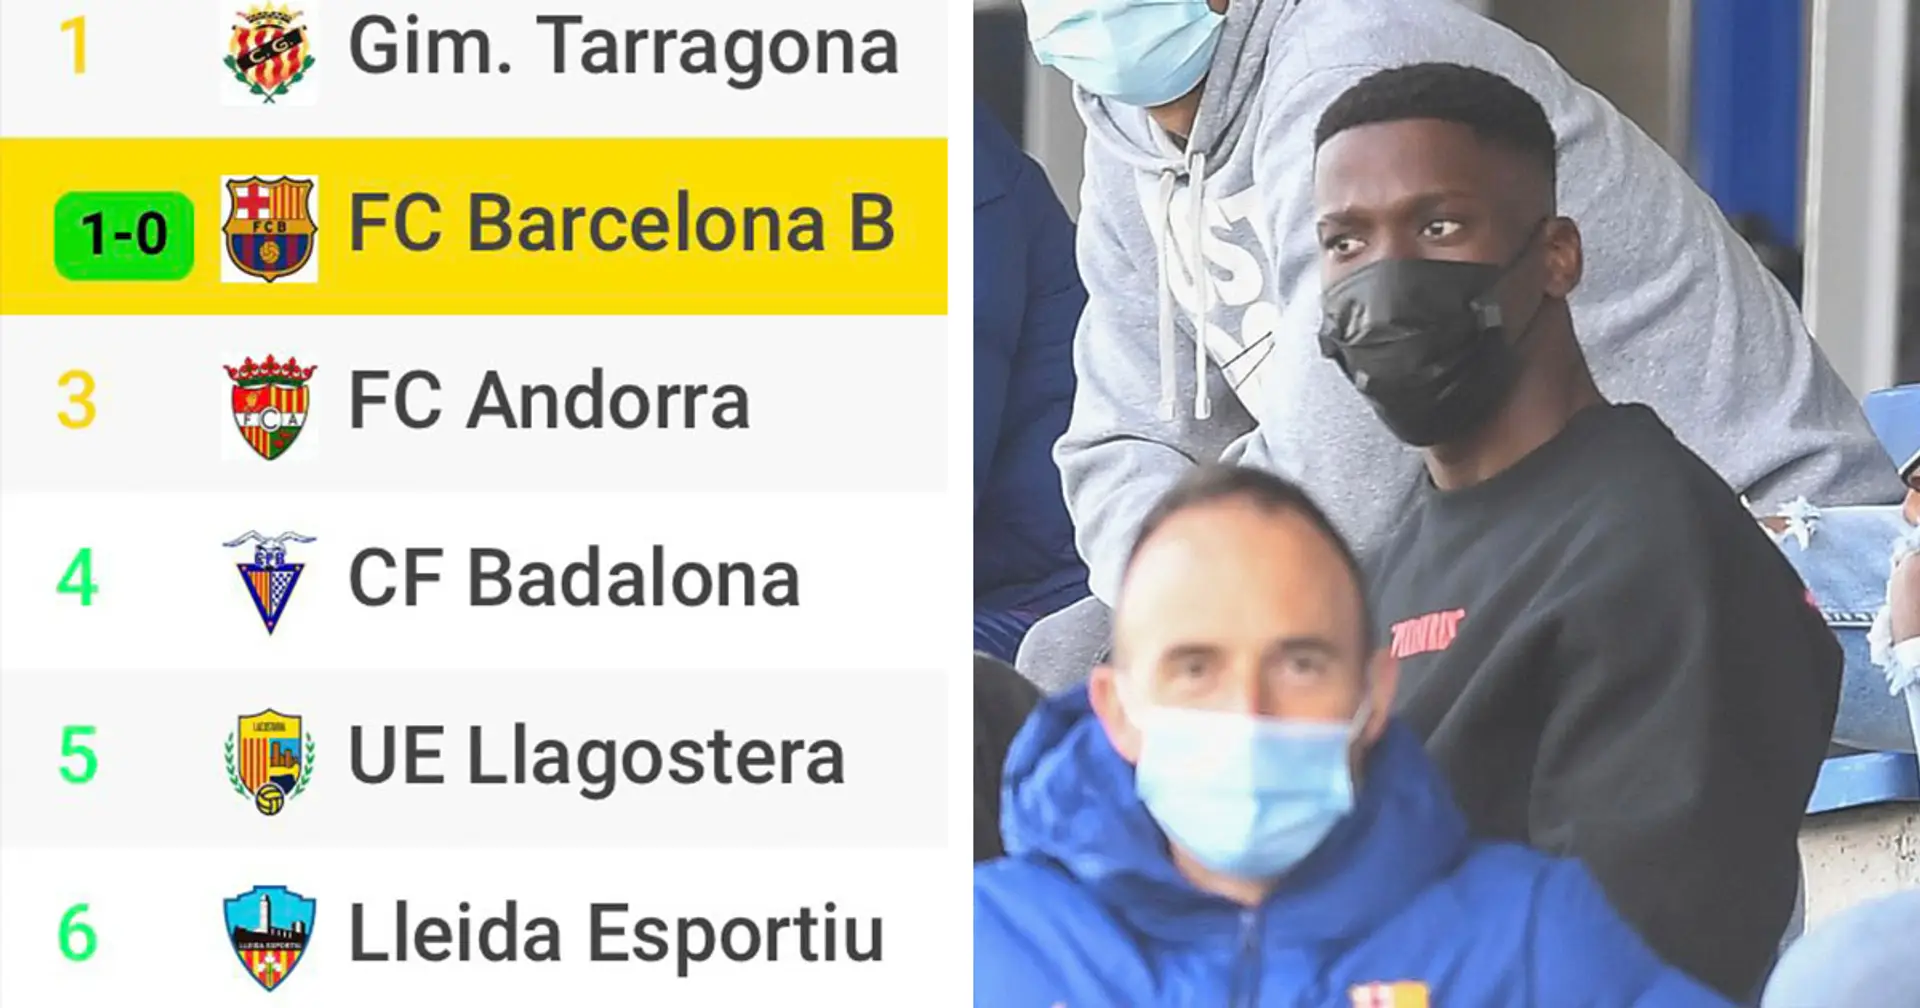 Immersed in football 24/7: Ilaix Moriba watching Barca B clash from stands